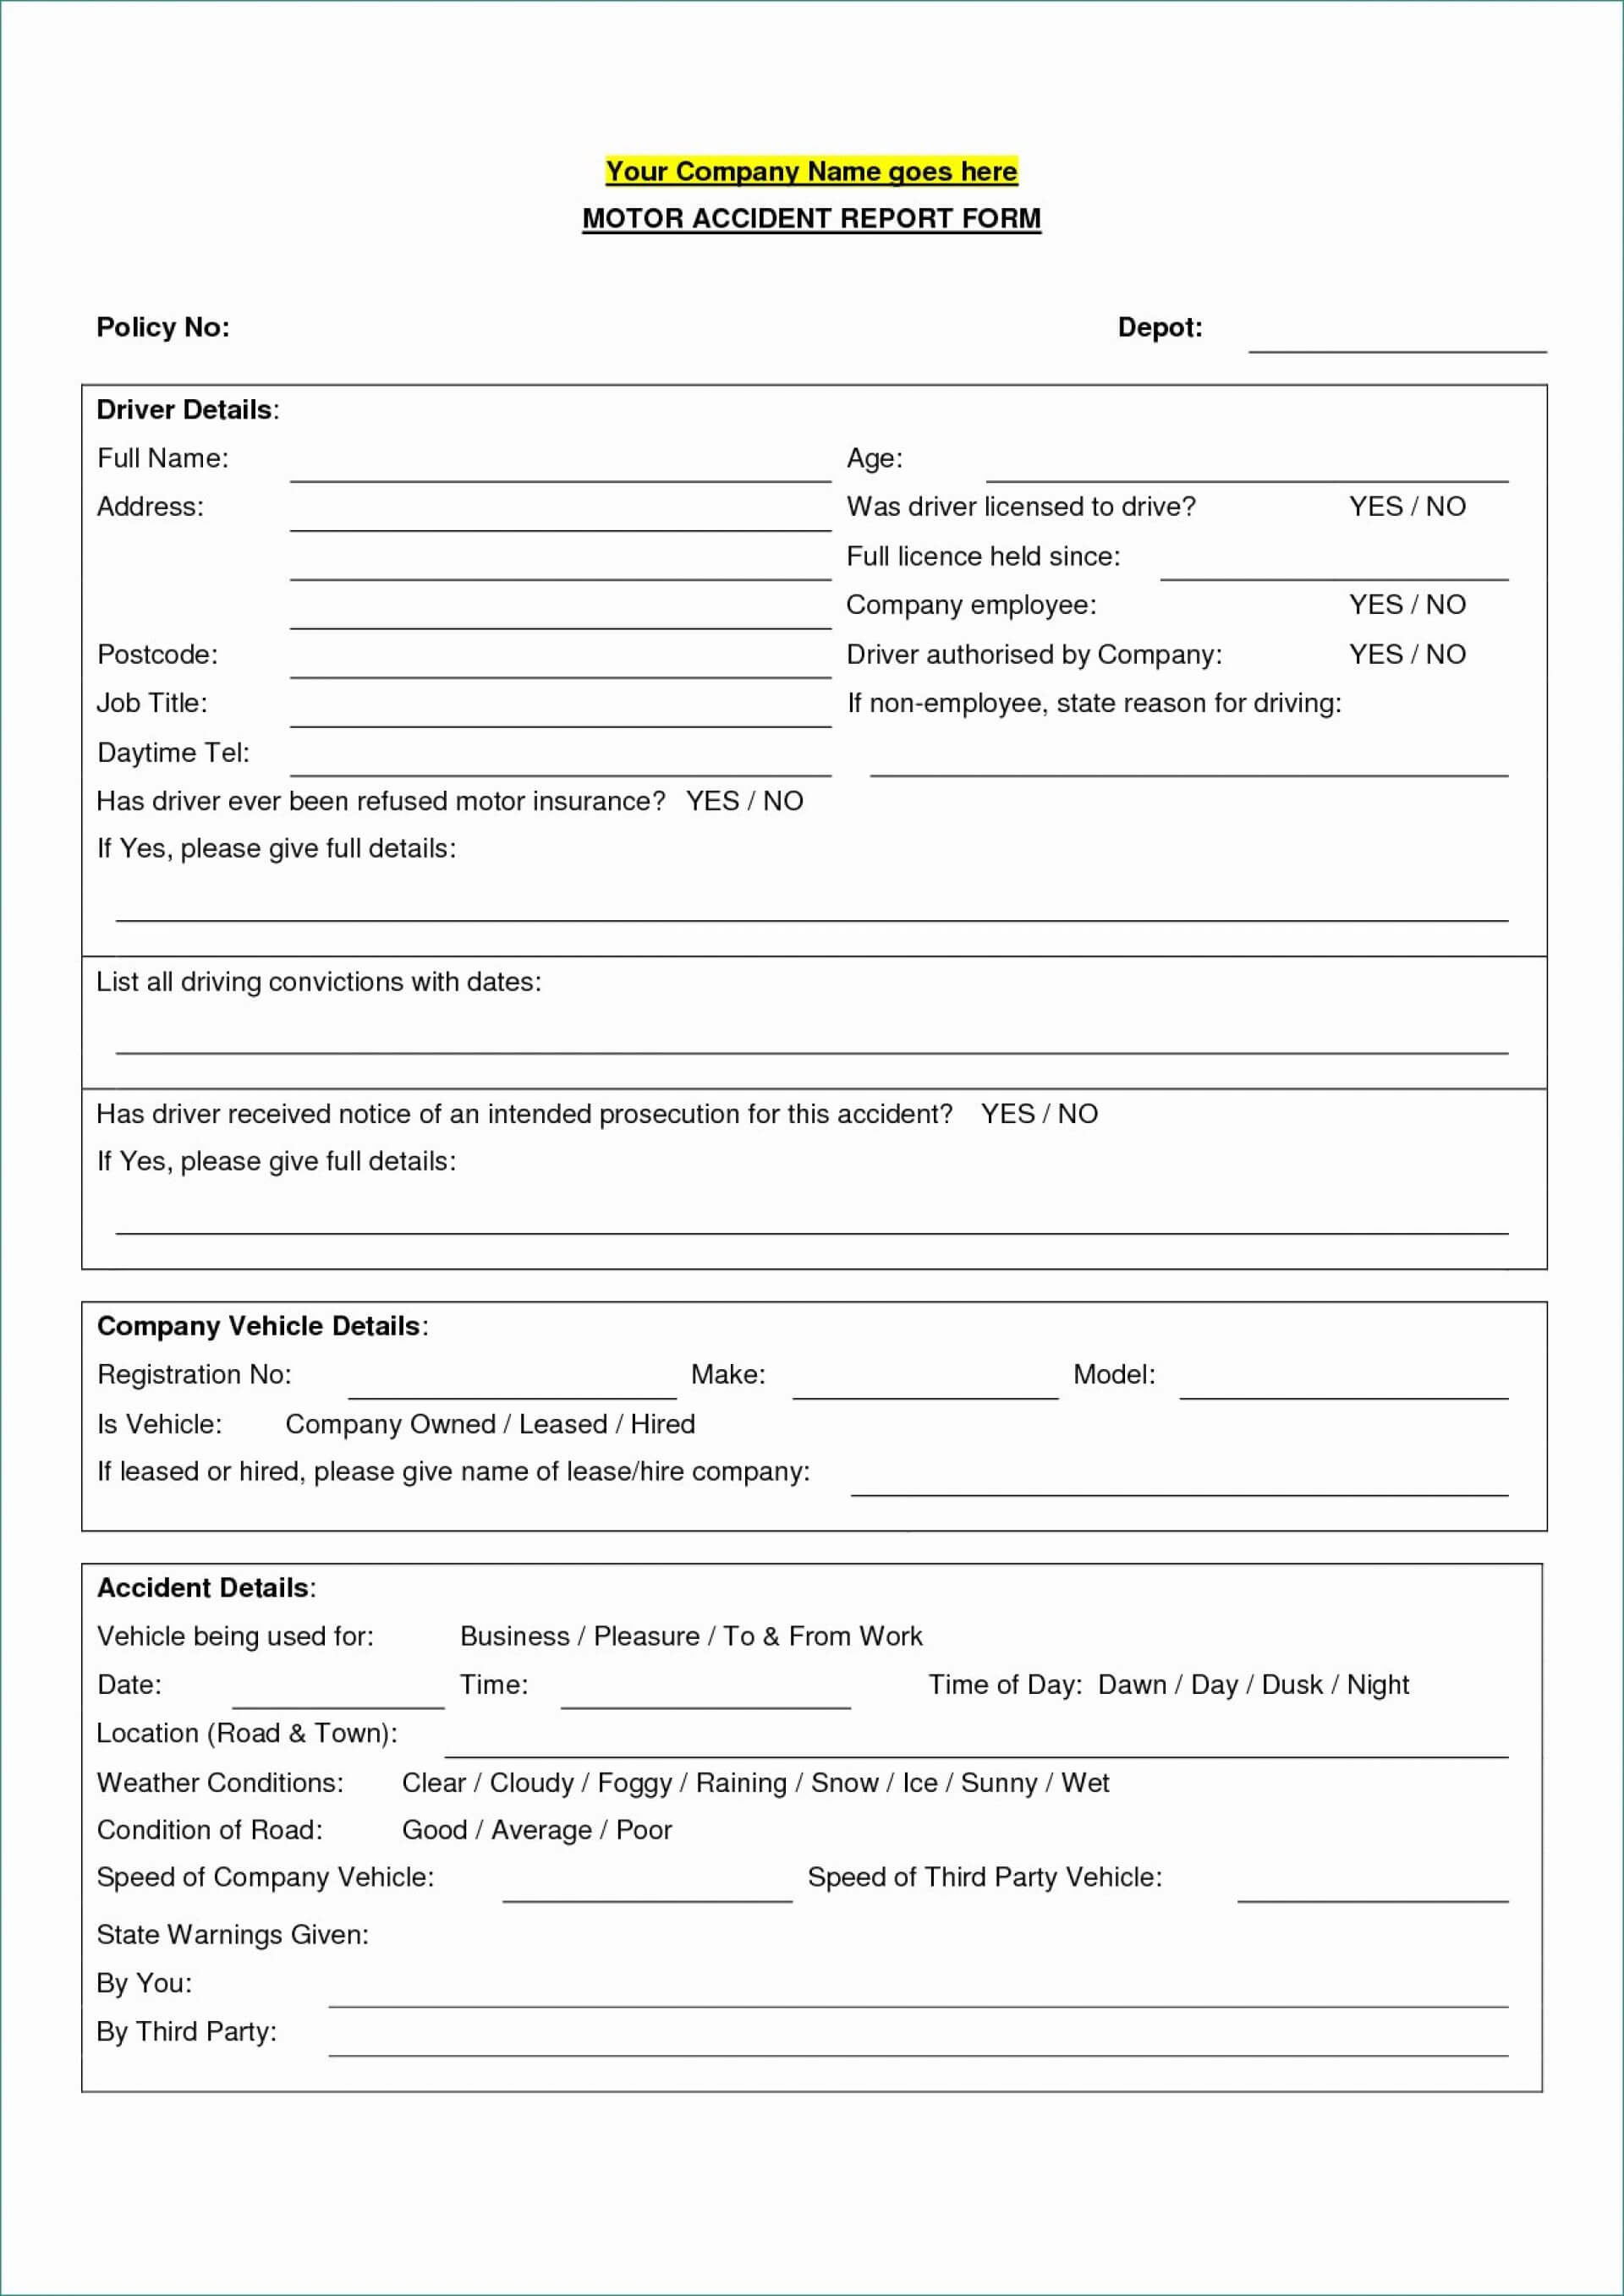 025 Vehicle Accident Report Form Template Ideas Sensational With Regard To Vehicle Accident Report Form Template